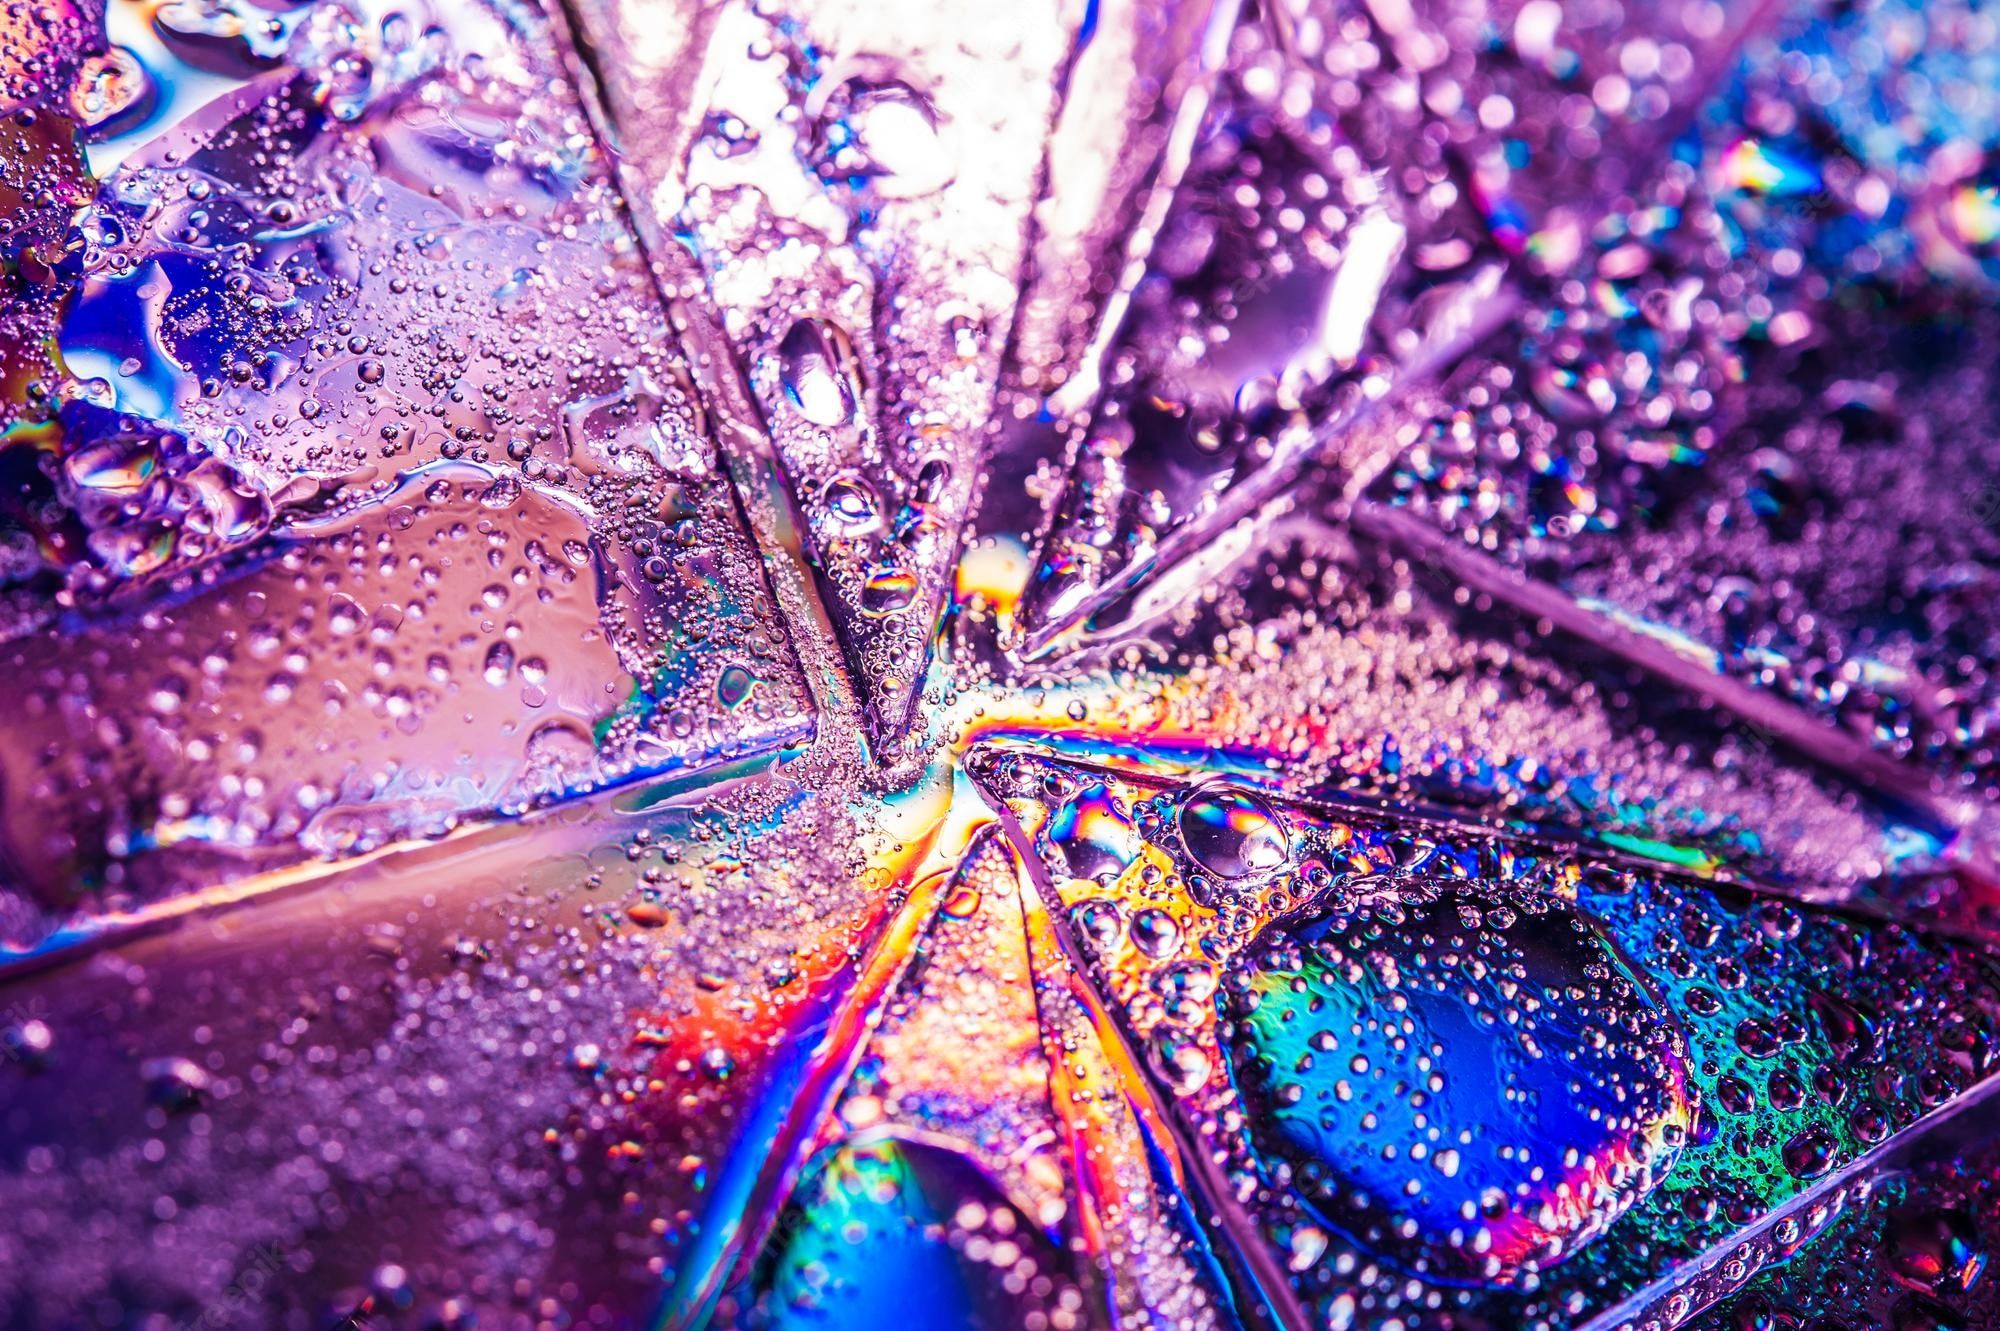 An abstract image of a colorful umbrella with water droplets on it - Bright, water, vaporwave